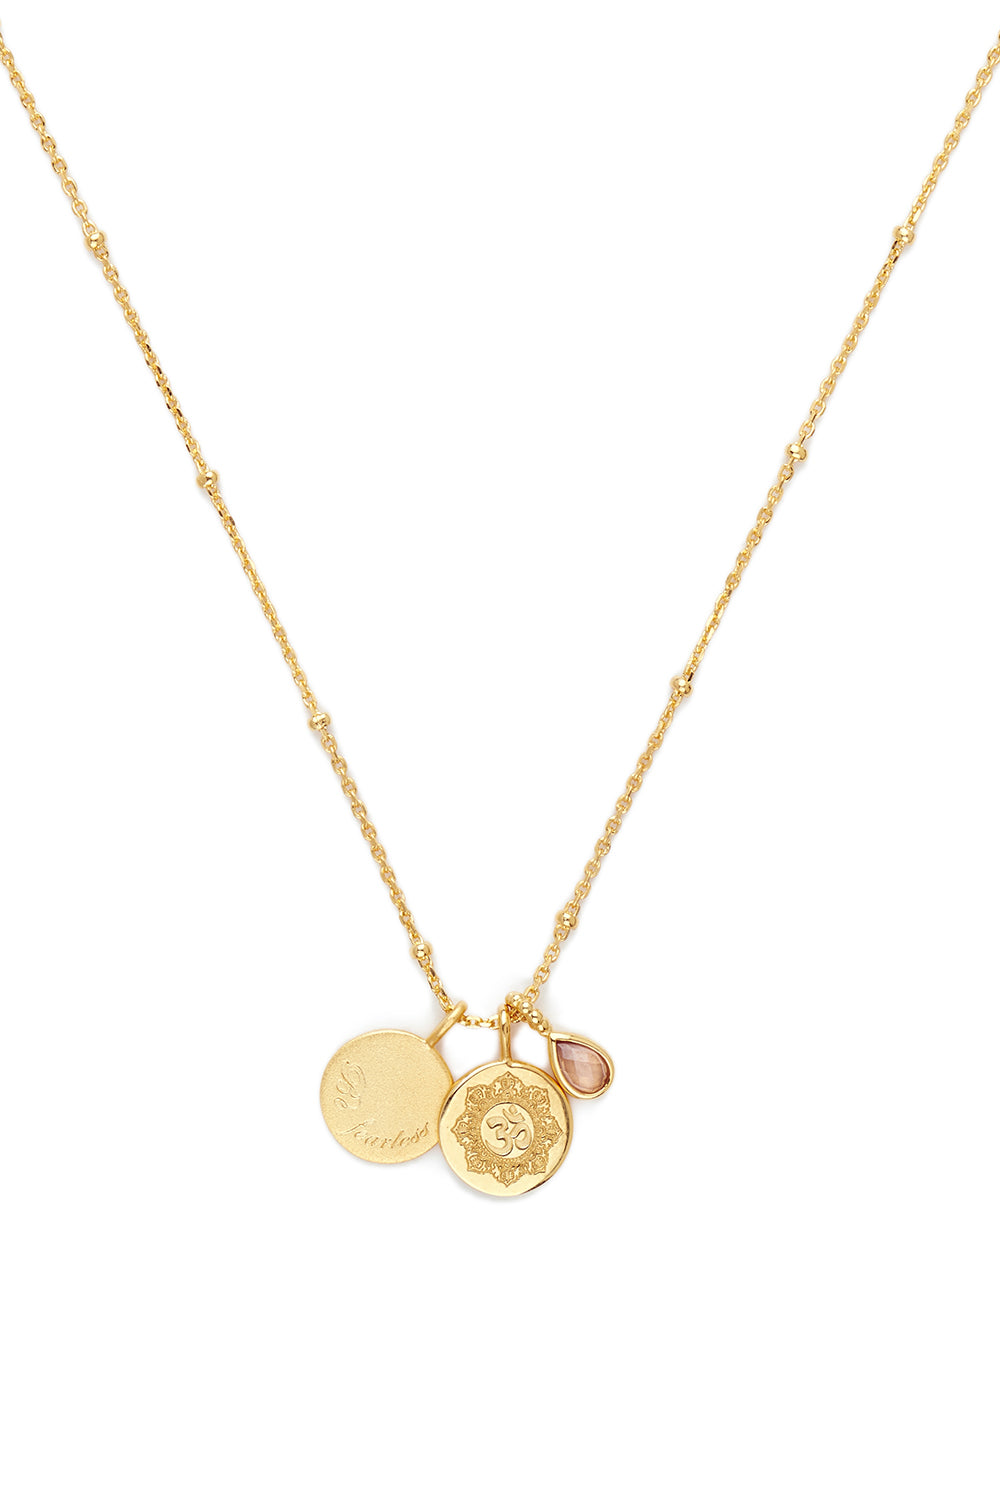 BY CHARLOTTE BEYOND SUN NECKLACE GOLD